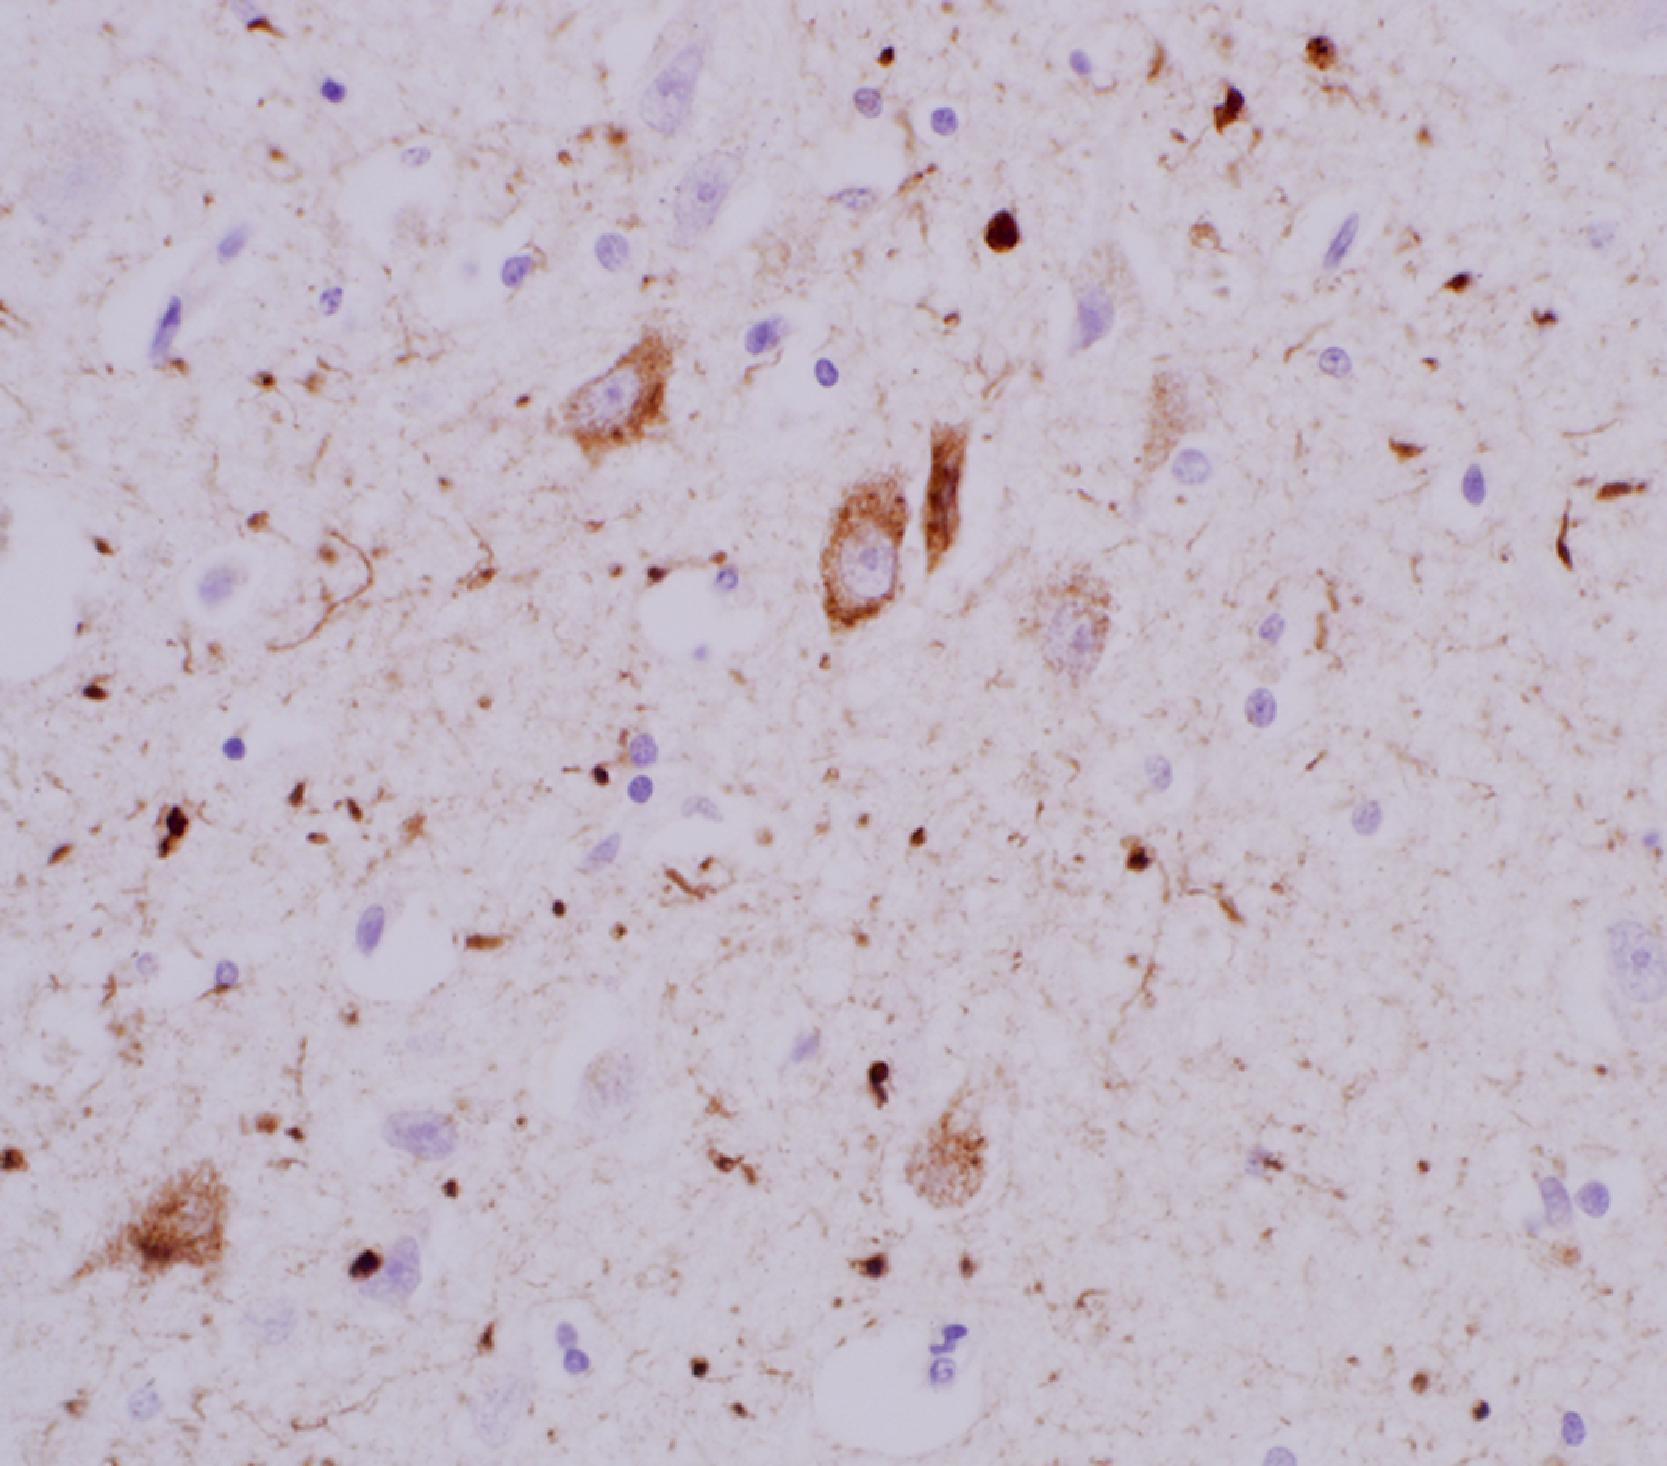 Figure 6.5, Pretangles as visualized by phospho-tau staining. Pretangles are non-fibrillar, granular deposits of tau that are common in various neurodegenerative diseases. Here, pretangles are shown in an elderly patient with concomitant, tau-positive argyrophilic grain disease pathology.